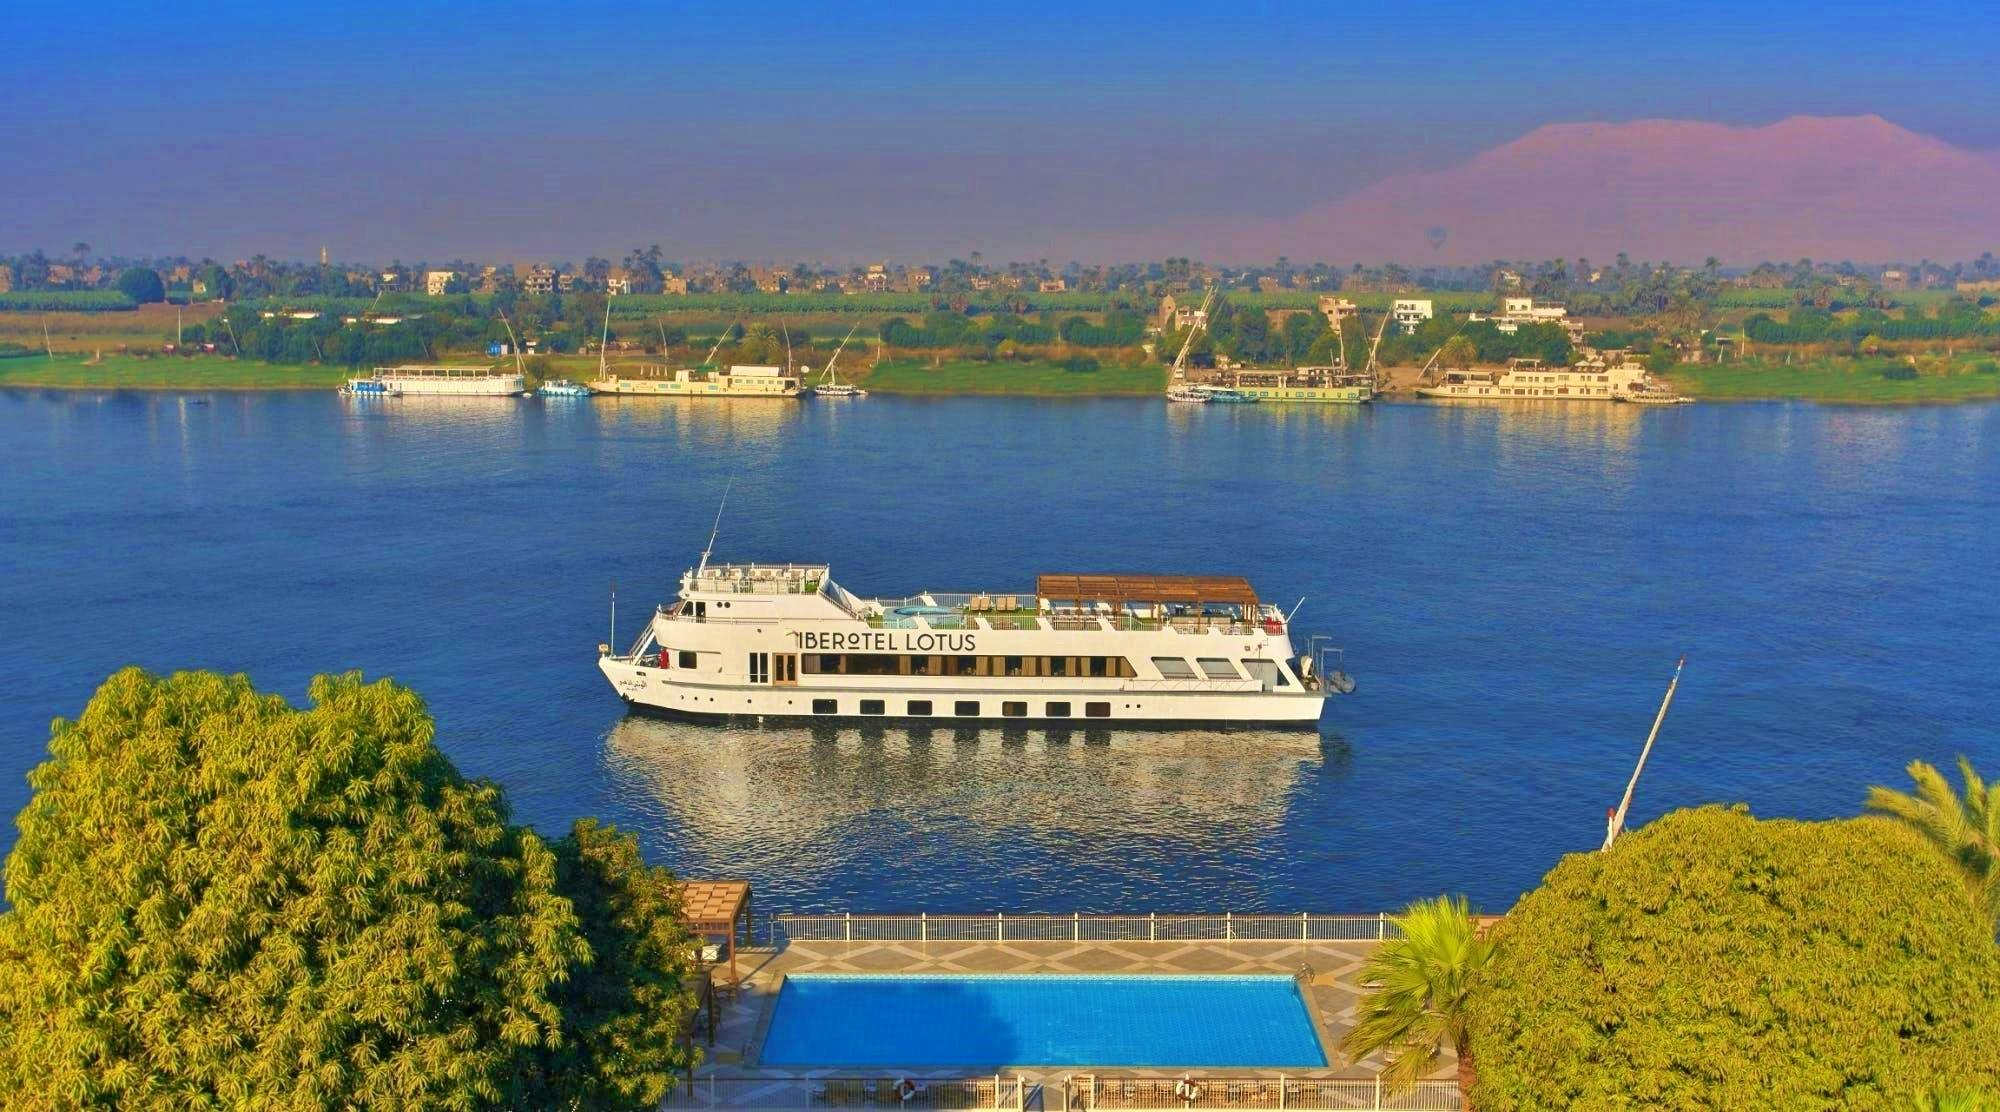 Luxor guided tour from Hurghada with Nile cruise and lunch Musement